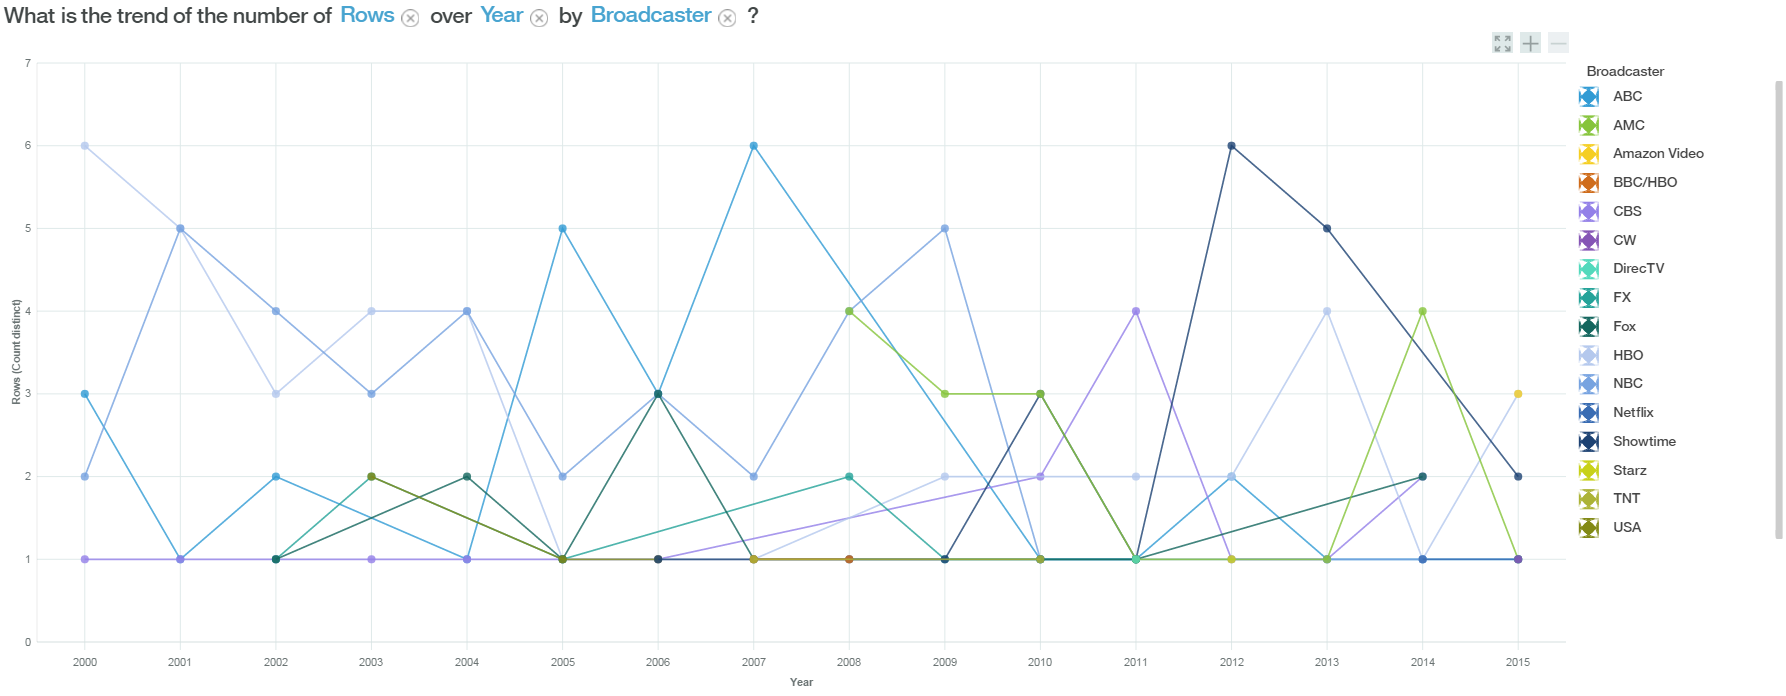 Line chart visualizing broadcaster with the most awards for their televsion shows from 2000 to 2015